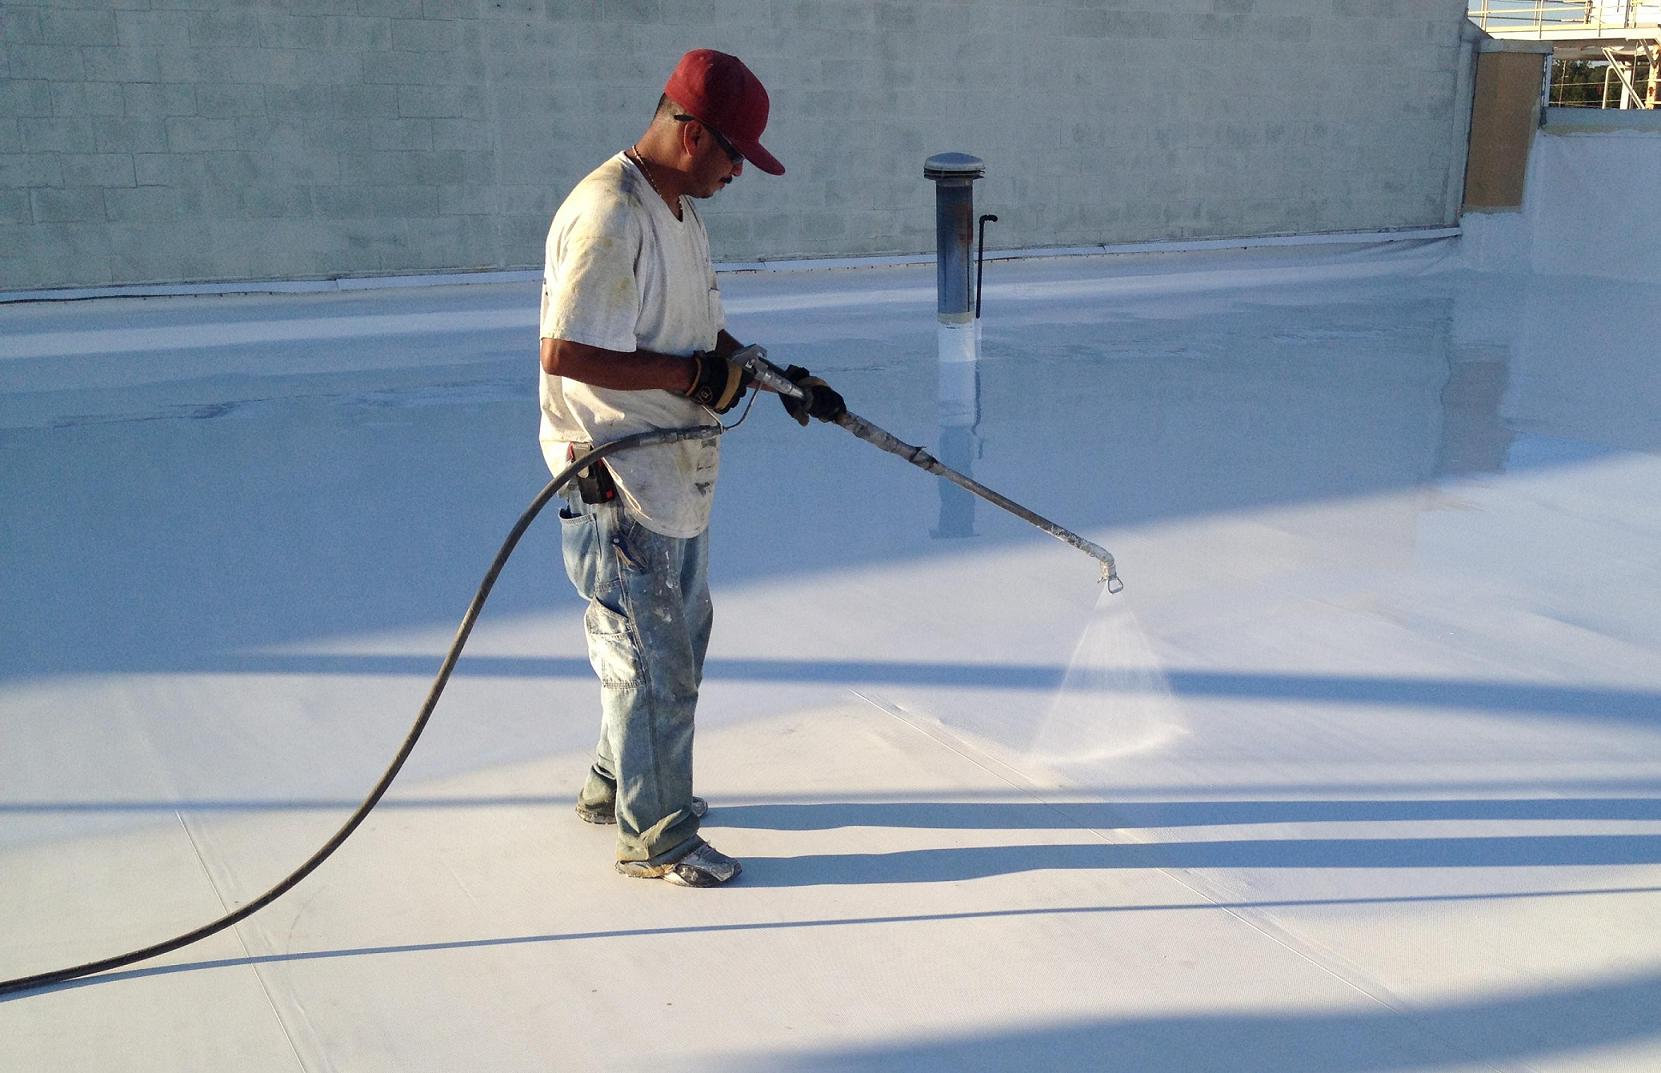 How to price roof coating jobs